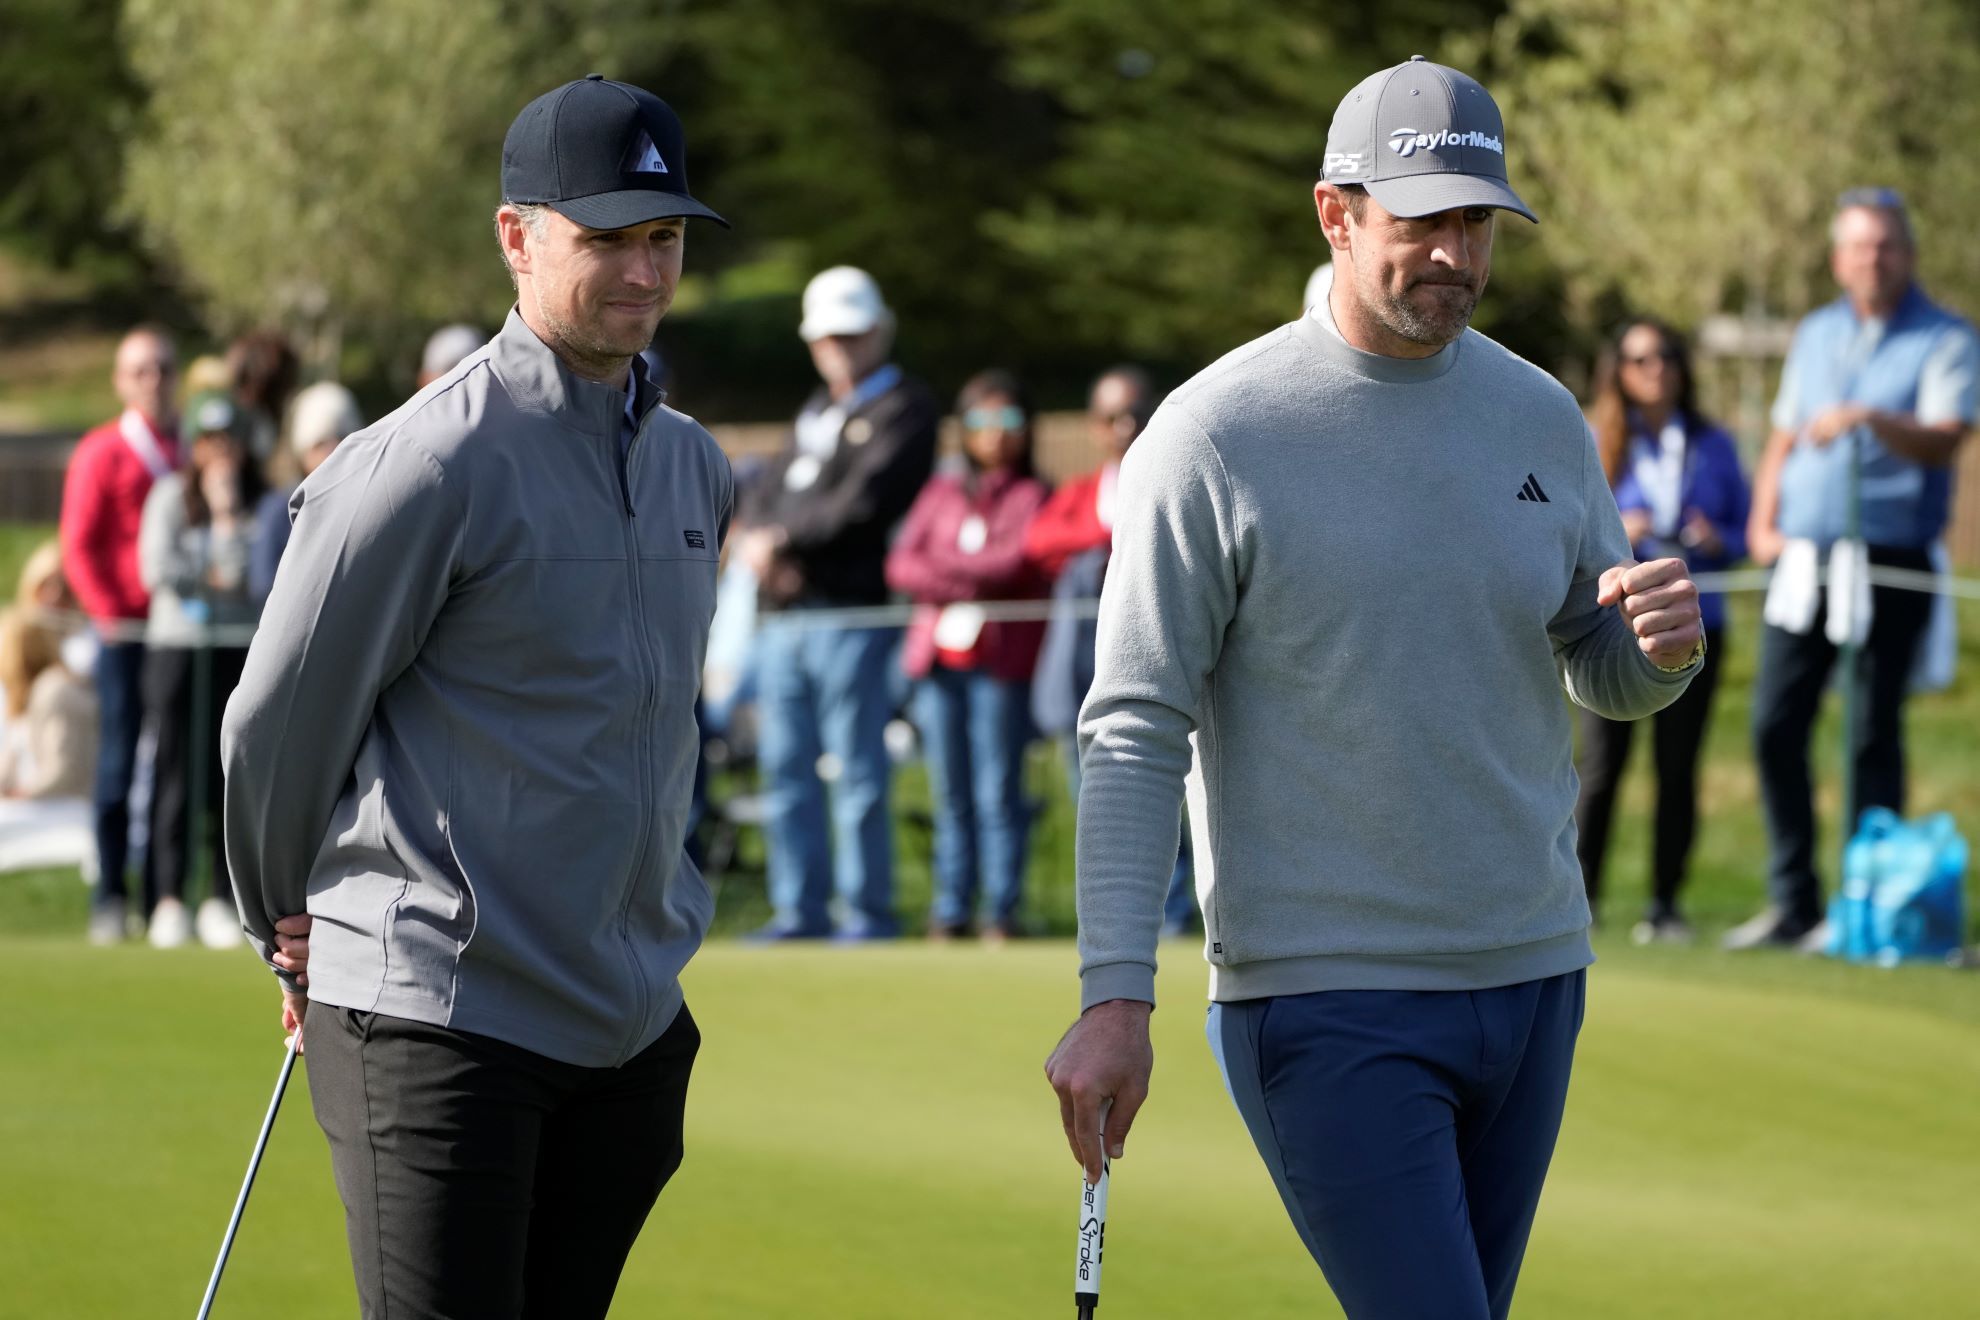 Buster Posey, left, and Aaron Rodgers watch during the putting challenge event of the AT&T Pebble Beach Pro-Am golf tournament in Pebble Beach.